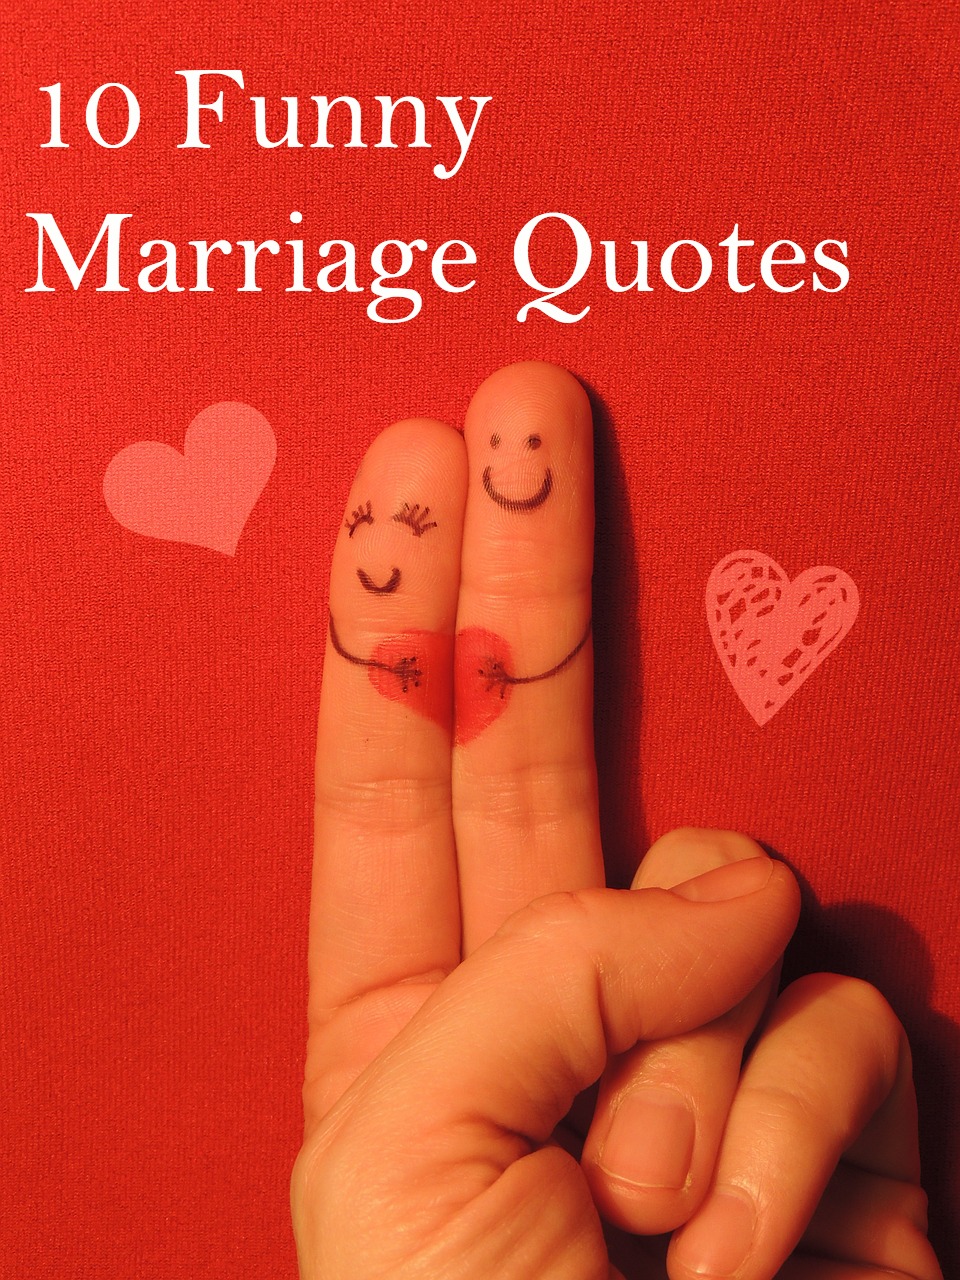 Funny Marriage Quotes Wifely Steps